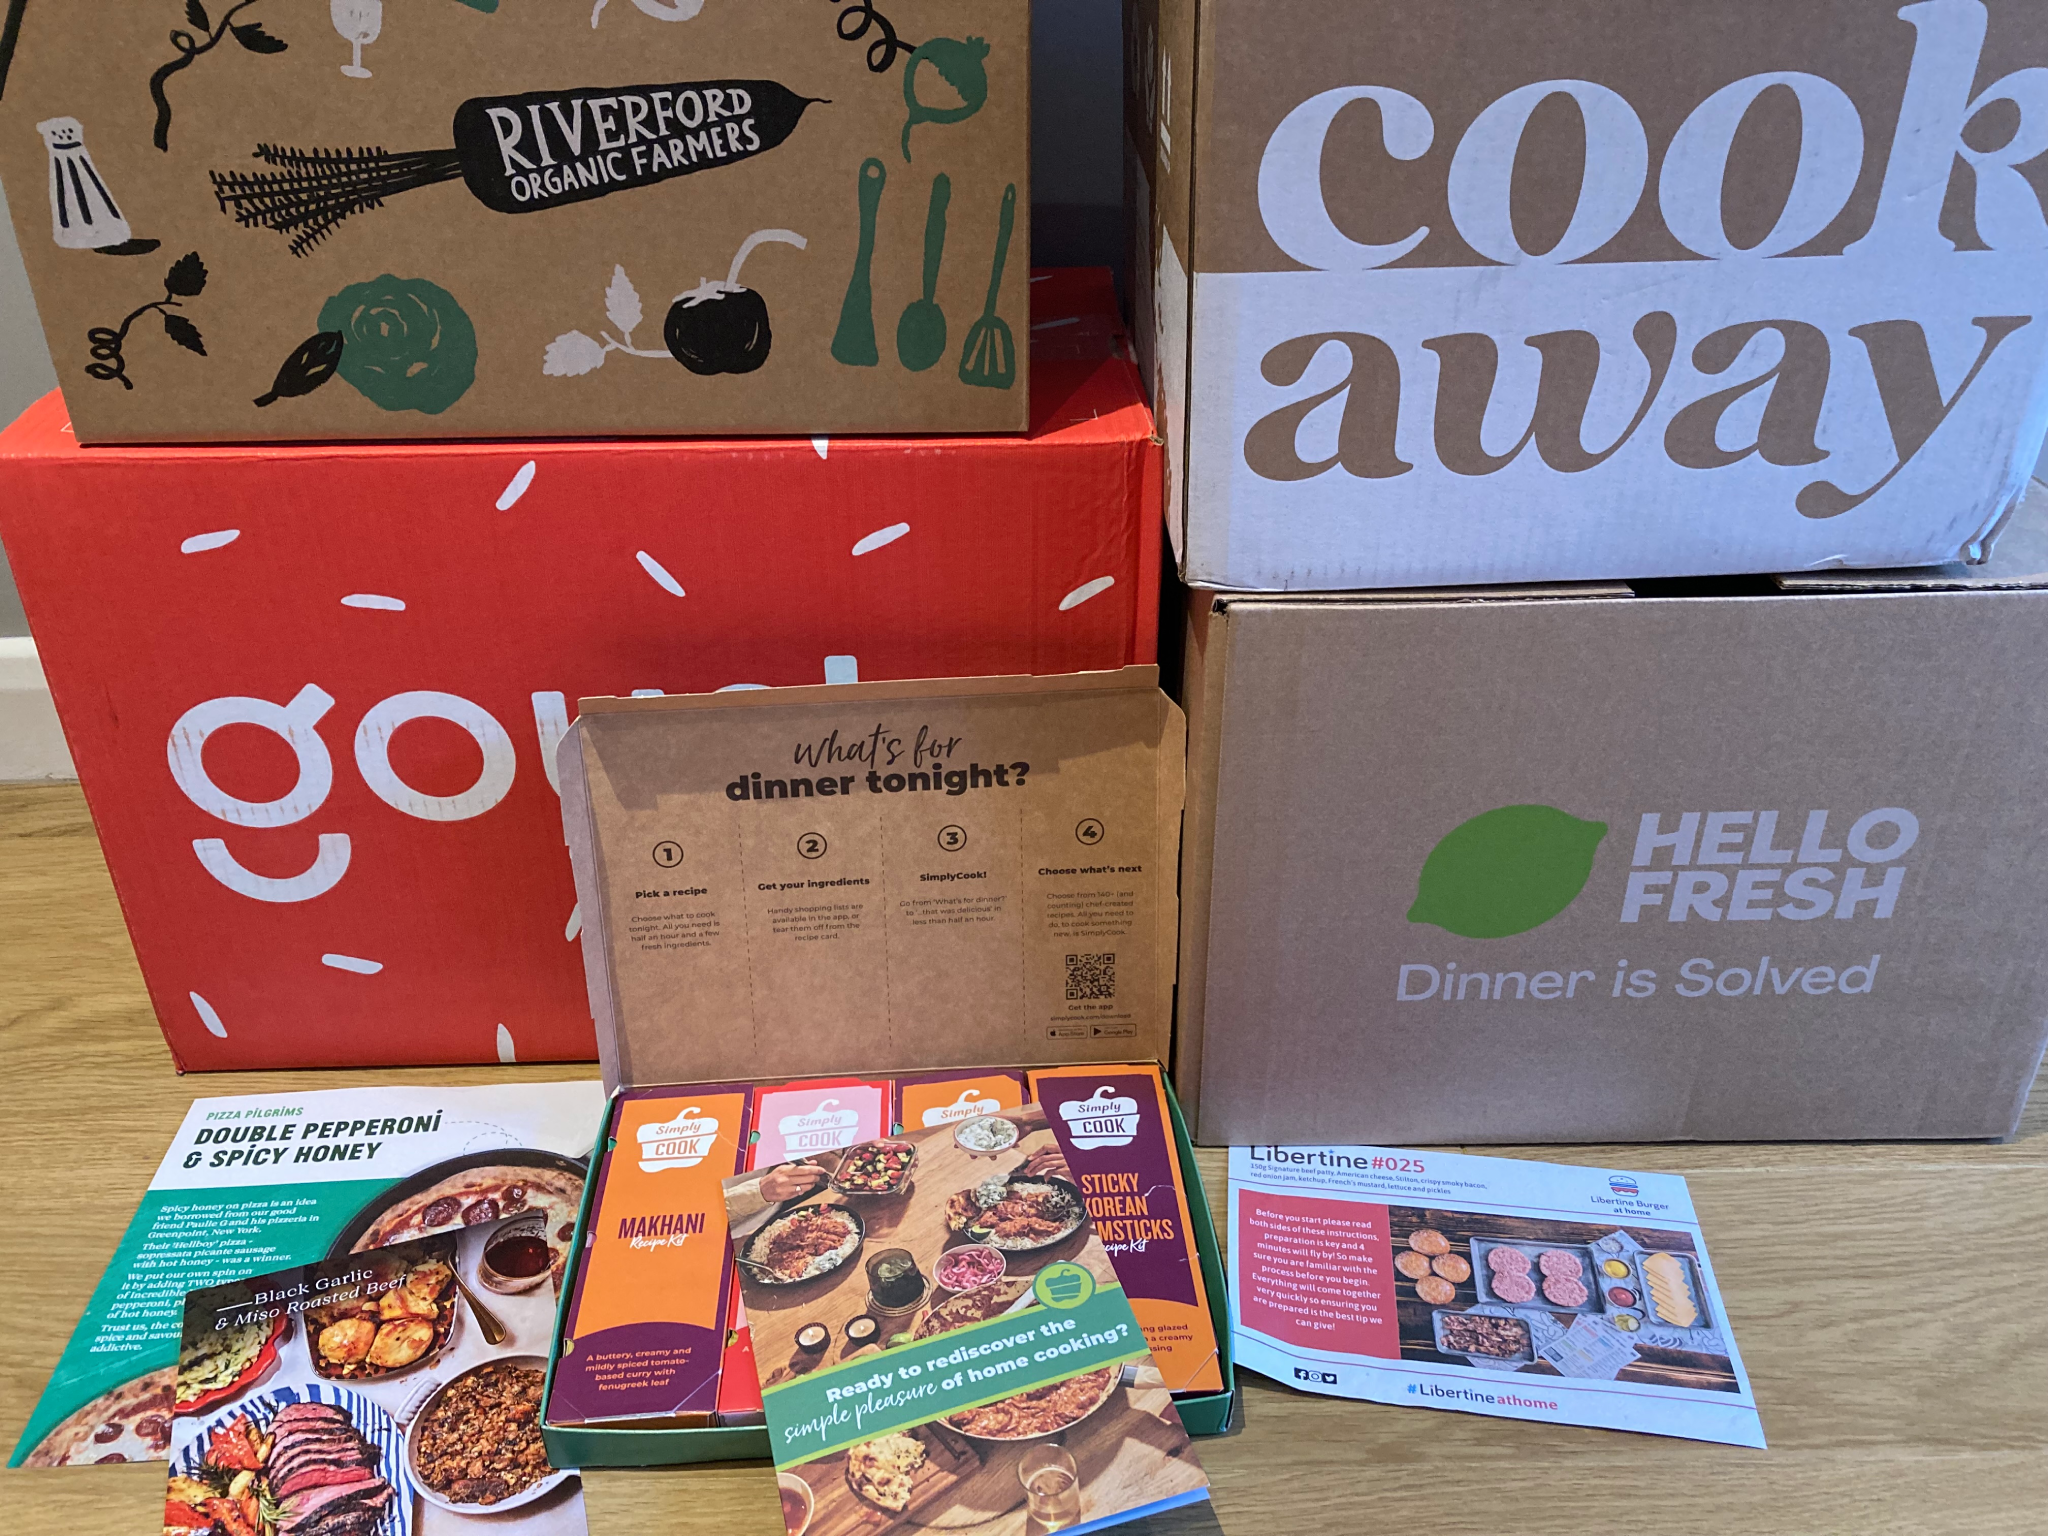 A selection of the recipe boxes that we tested for this review